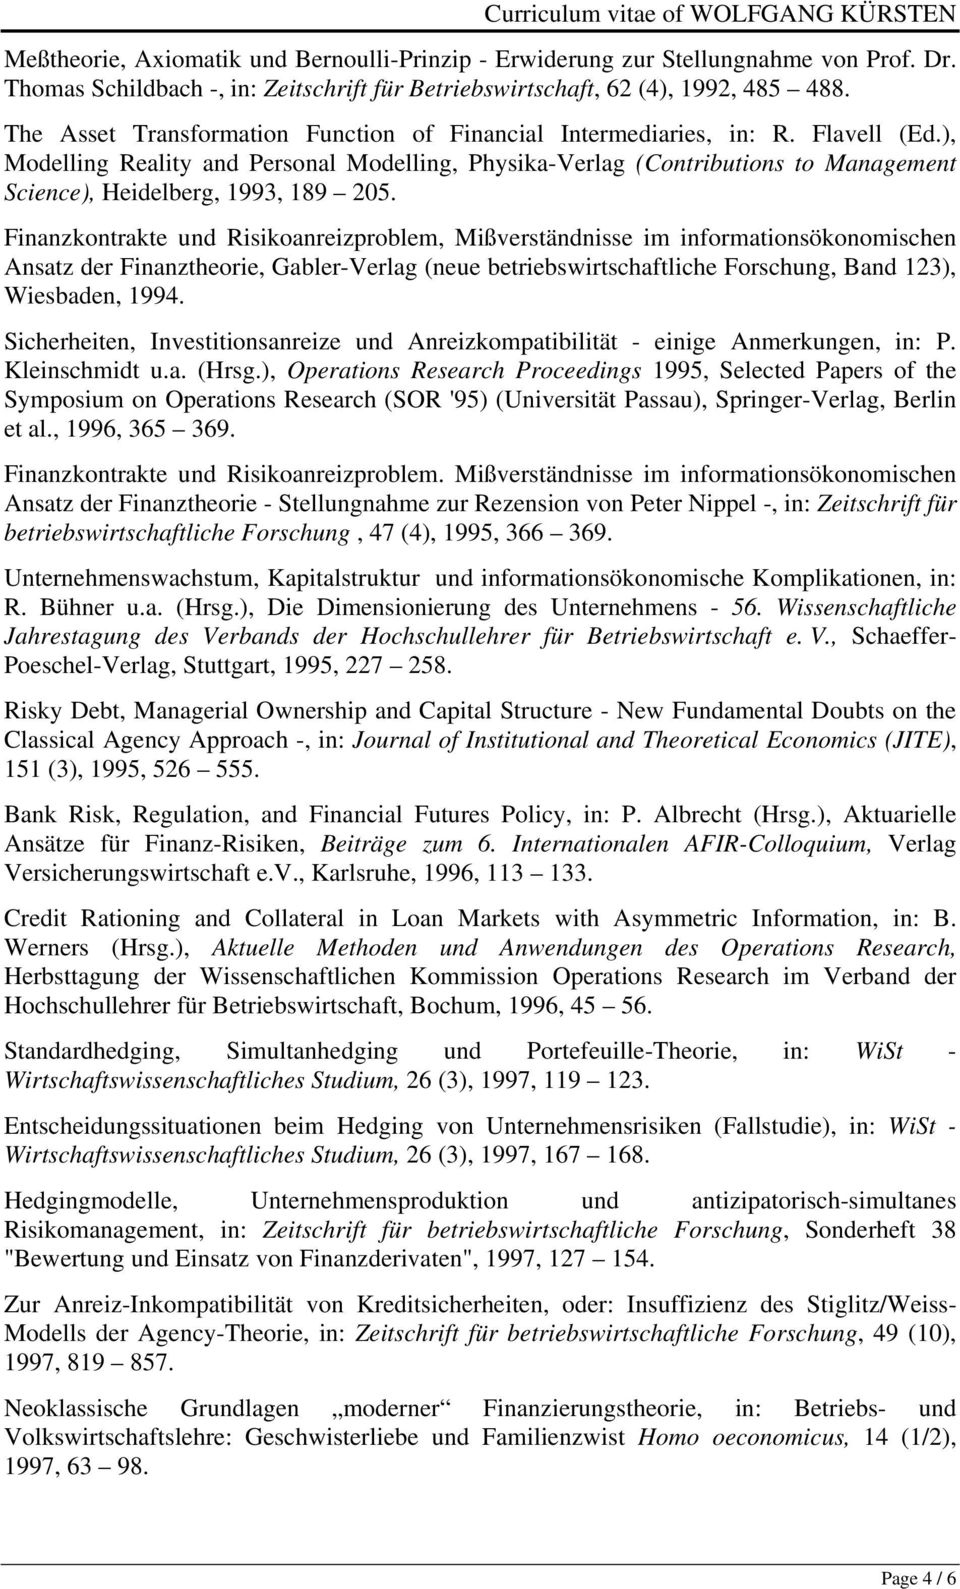 ), Modelling Reality and Personal Modelling, Physika-Verlag (Contributions to Management Science), Heidelberg, 1993, 189 205.